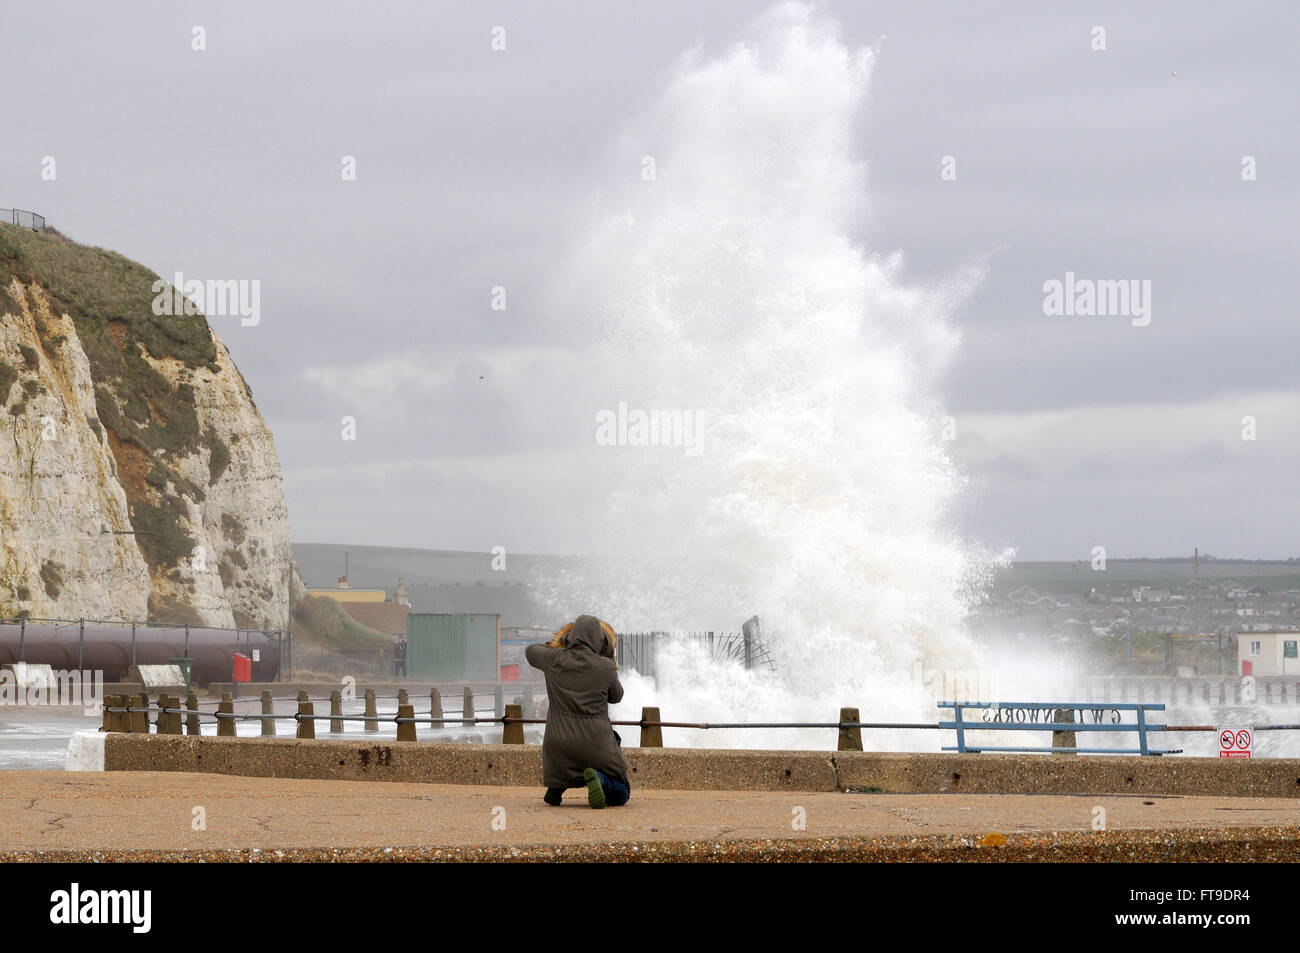 Newhaven, East Sussex, UK.26 March 2016.Windy weather arrives on the South coast. Photographer captures the waves.. Stock Photo